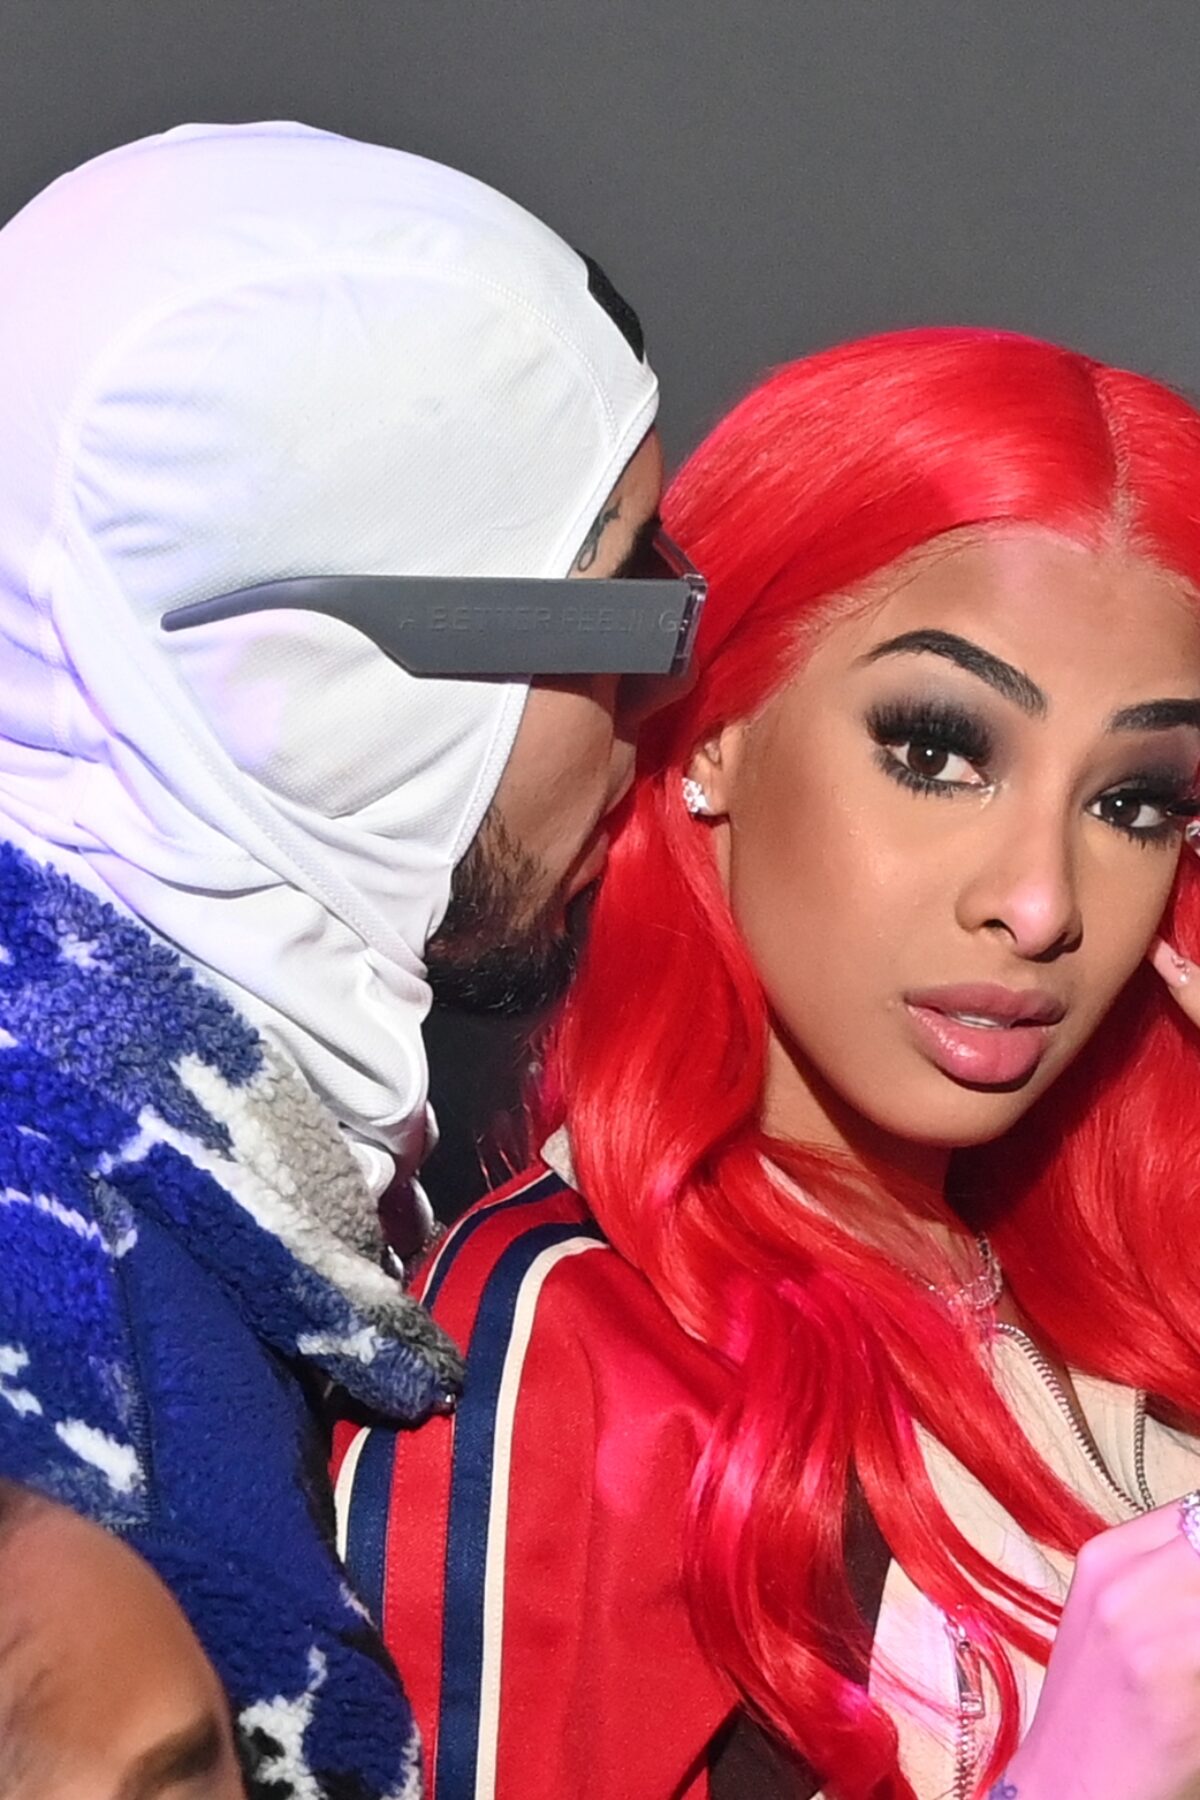 CLEVELAND, OH - FEBRUARY 20: Anuel AA and Yailin la Mas Viral attend All Star WKND Finale at Galleria at Erieview on February 20, 2022 in Cleveland, Ohio.(Photo by Prince Williams/Wireimage)_divorce